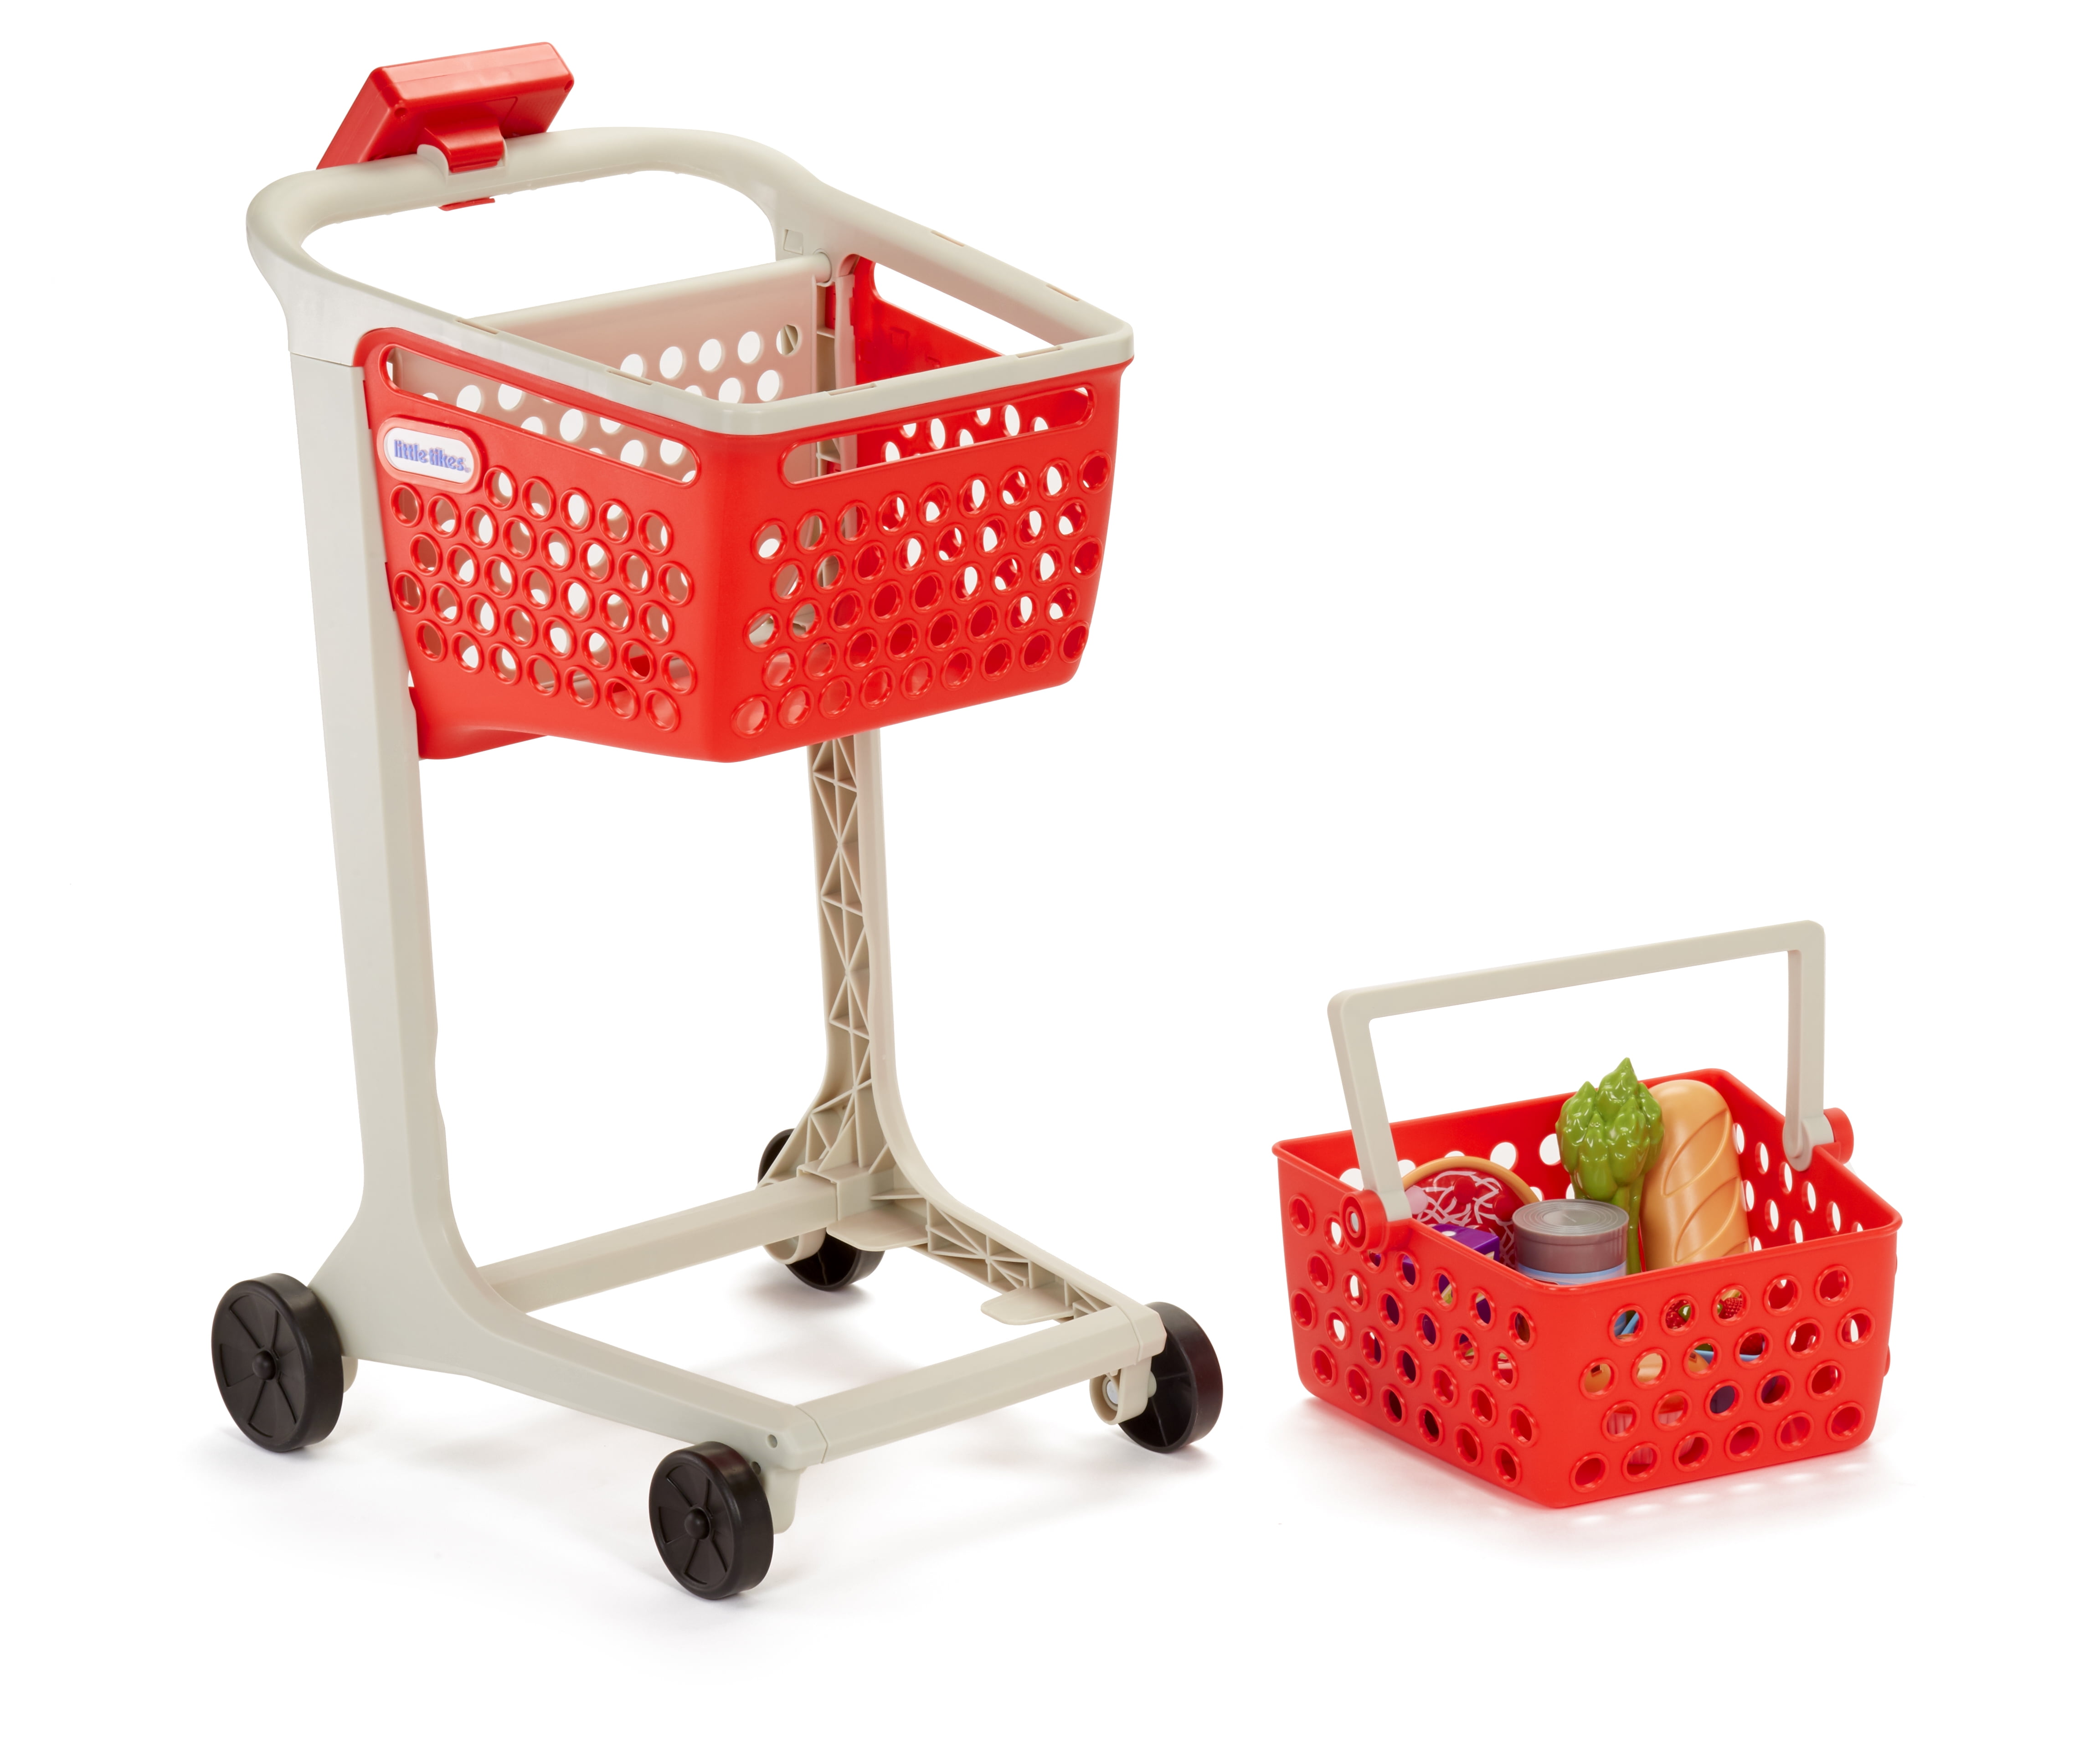 Kids and Toddler Pretend Play Shopping Cart With Groceries Durable Metal Sturdy for sale online 